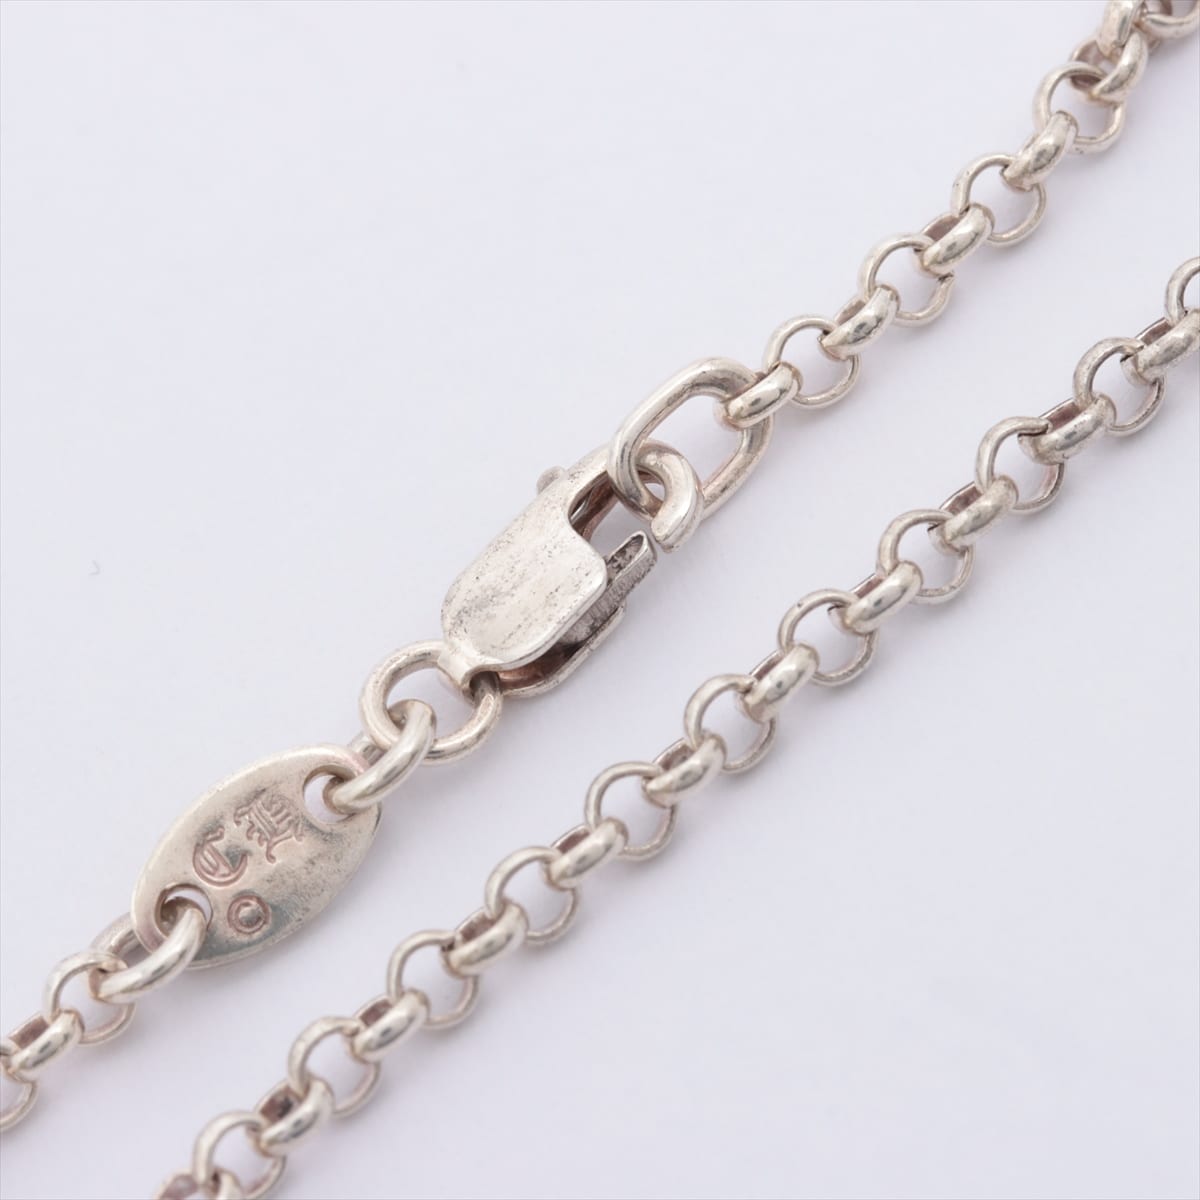 Chrome Hearts CH Cross Baby fat charms Necklace 925 7.0g With invoice pavé sapphire  Roll chain